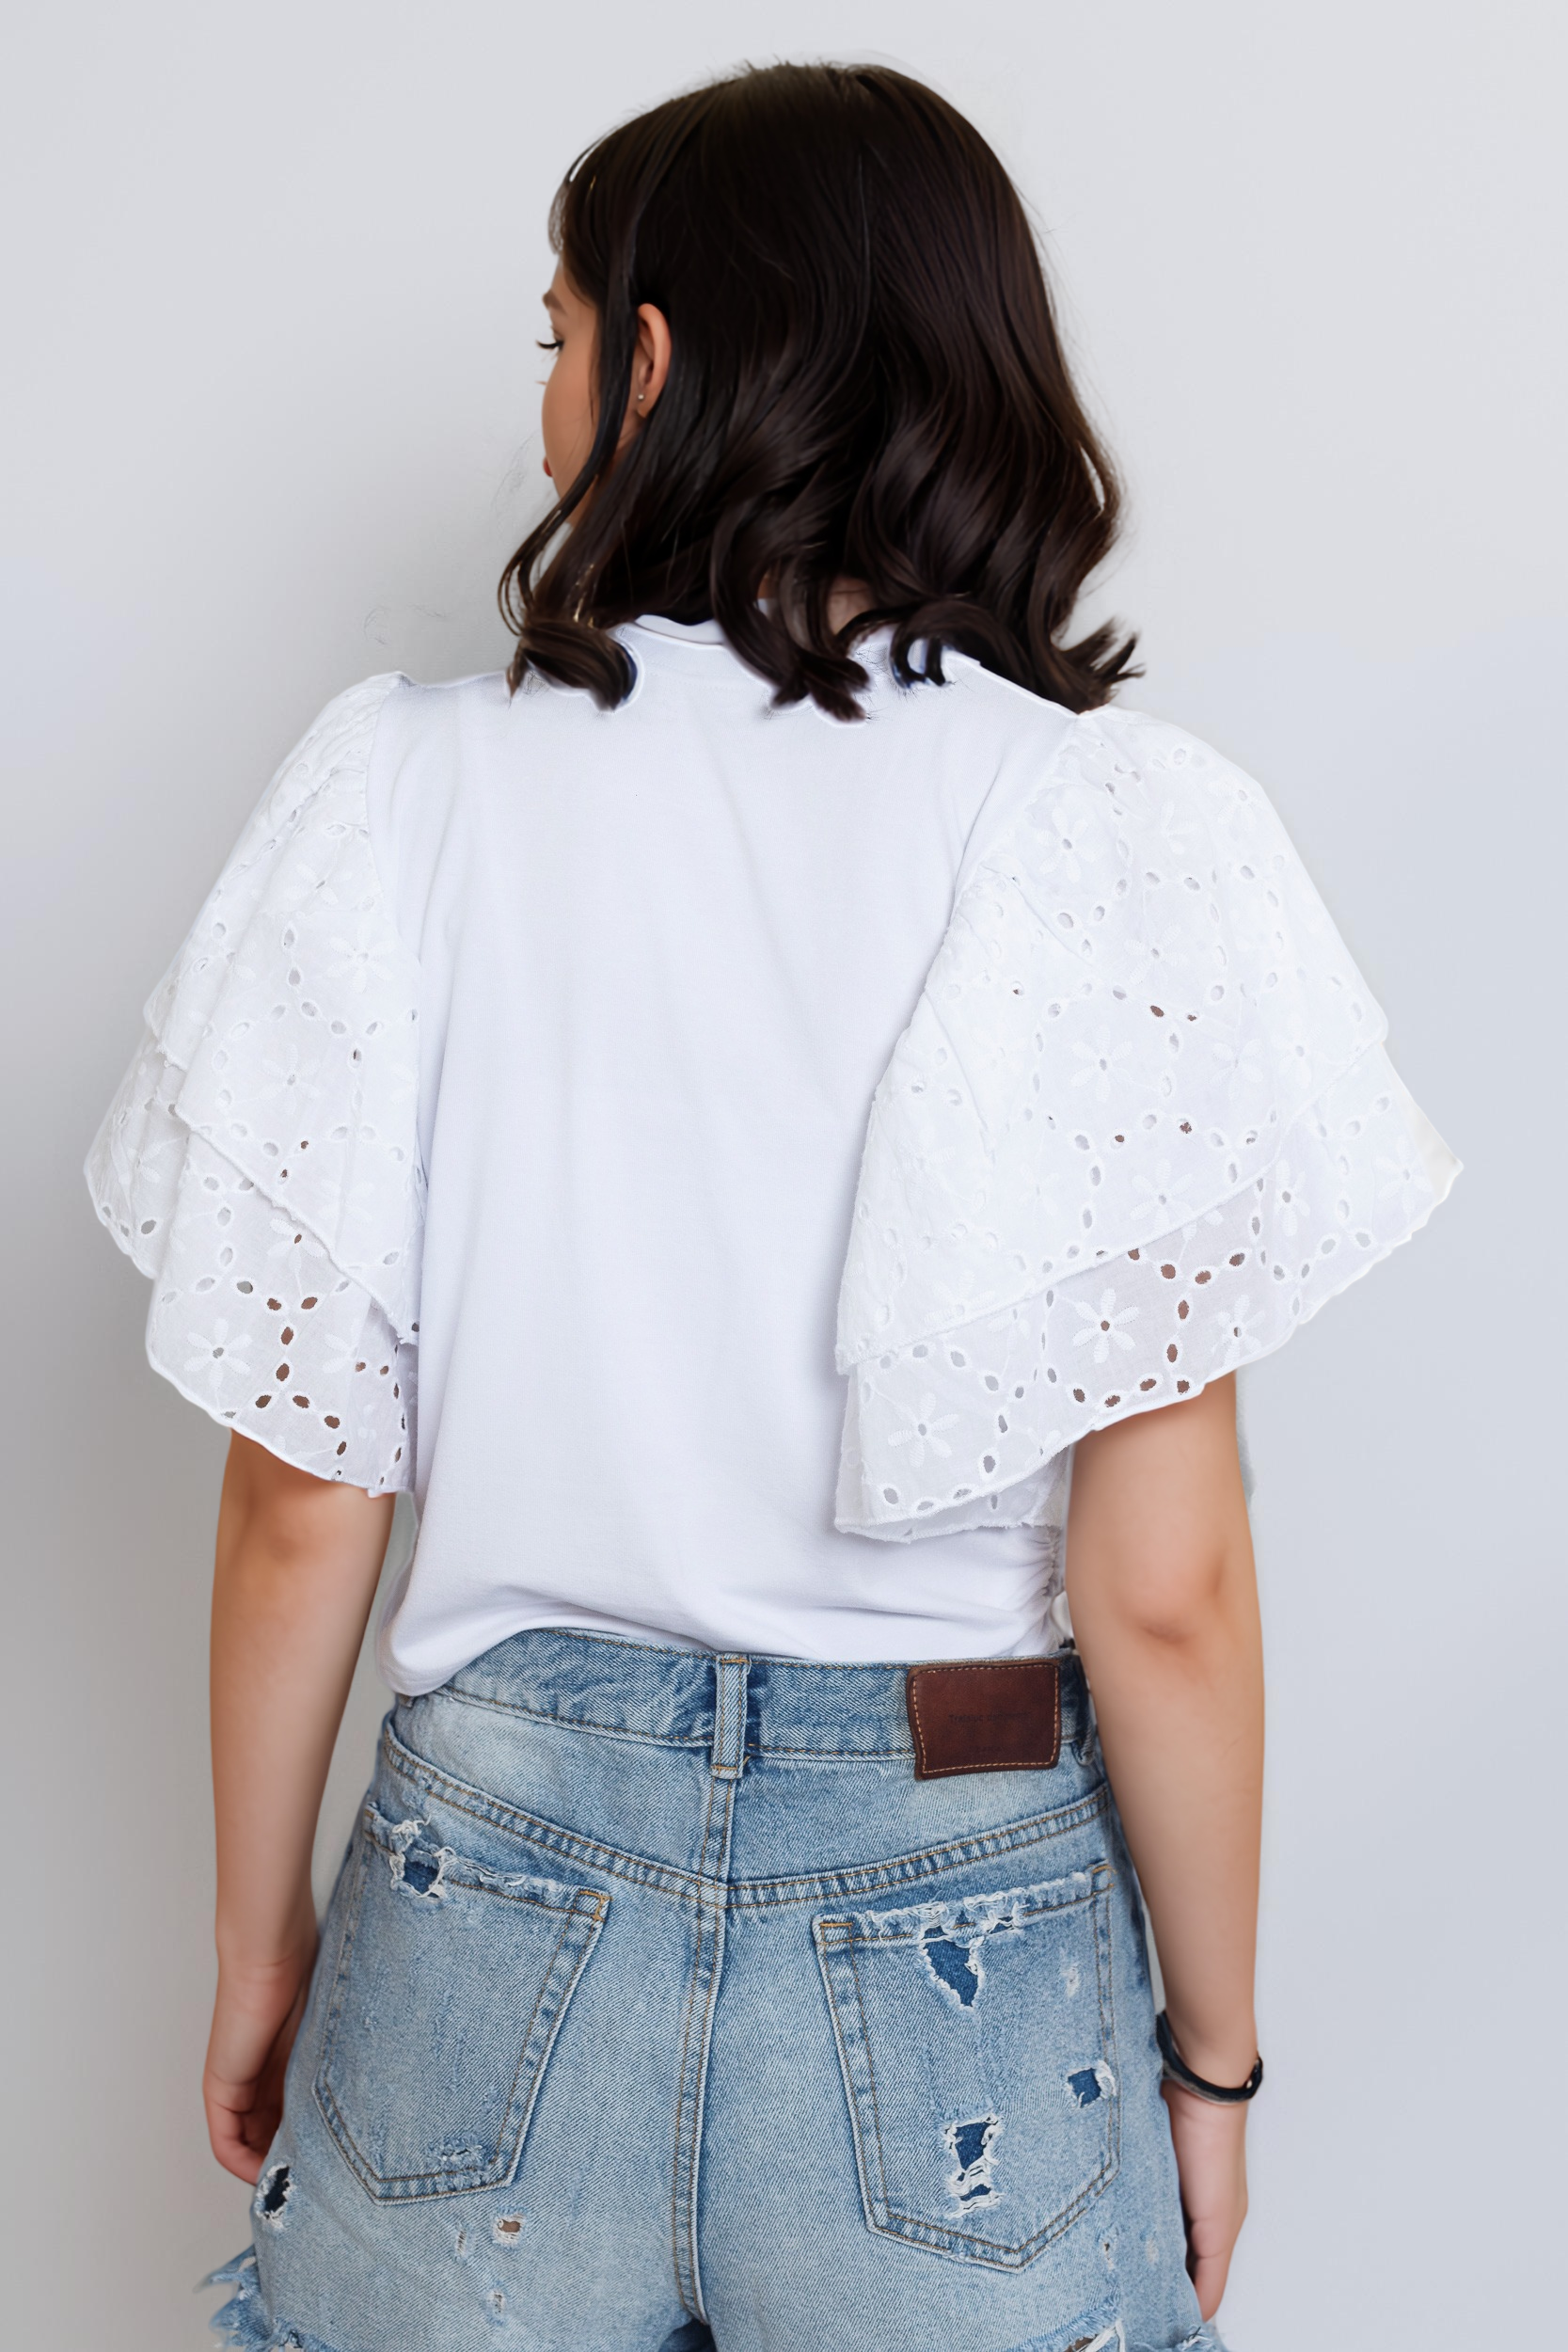 Cropped Top With Broderie Anglaise Sleeves For Women - White